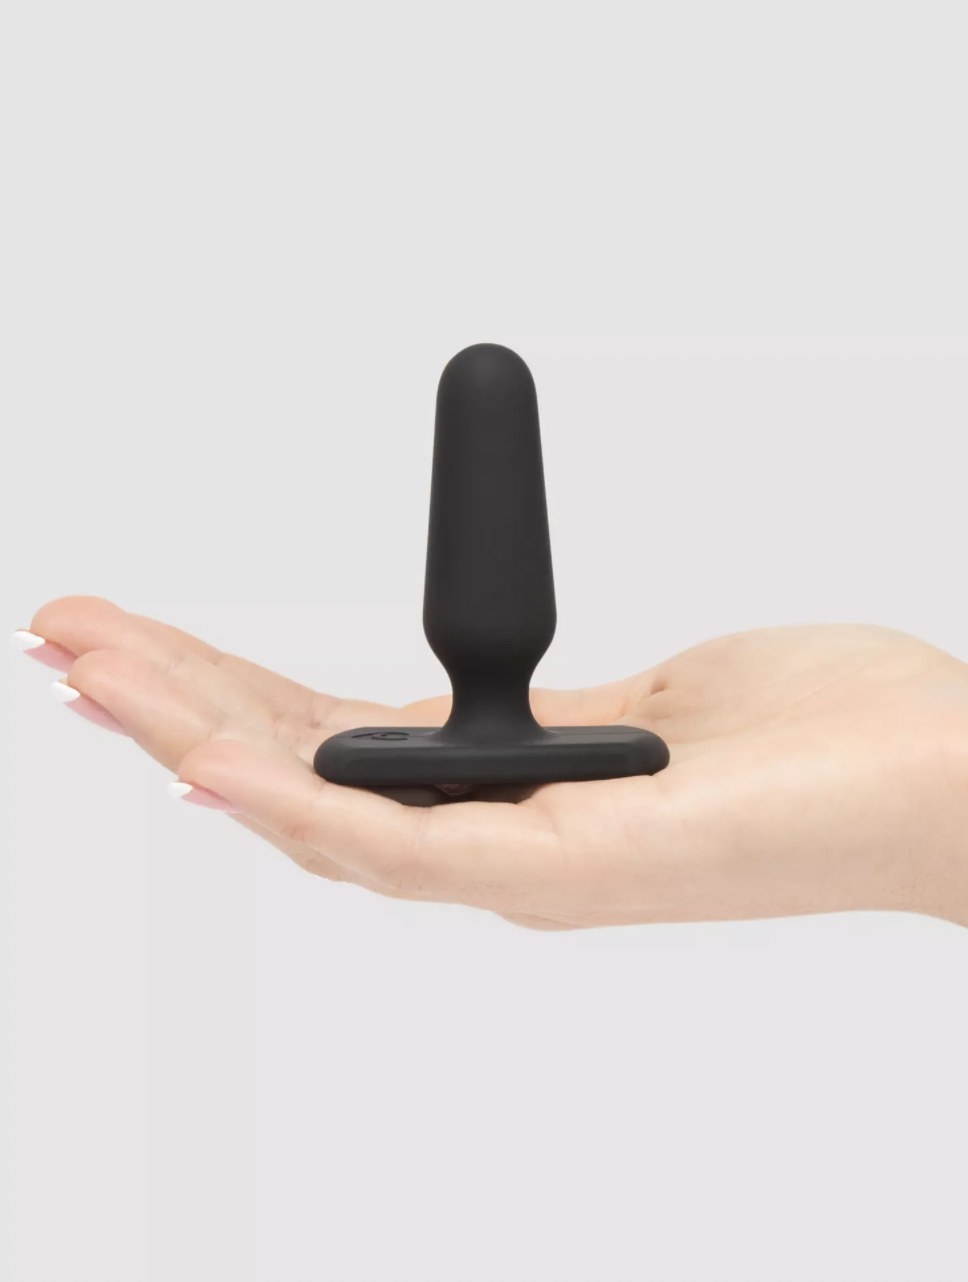 The black butt plug held in someone&#x27;s palm